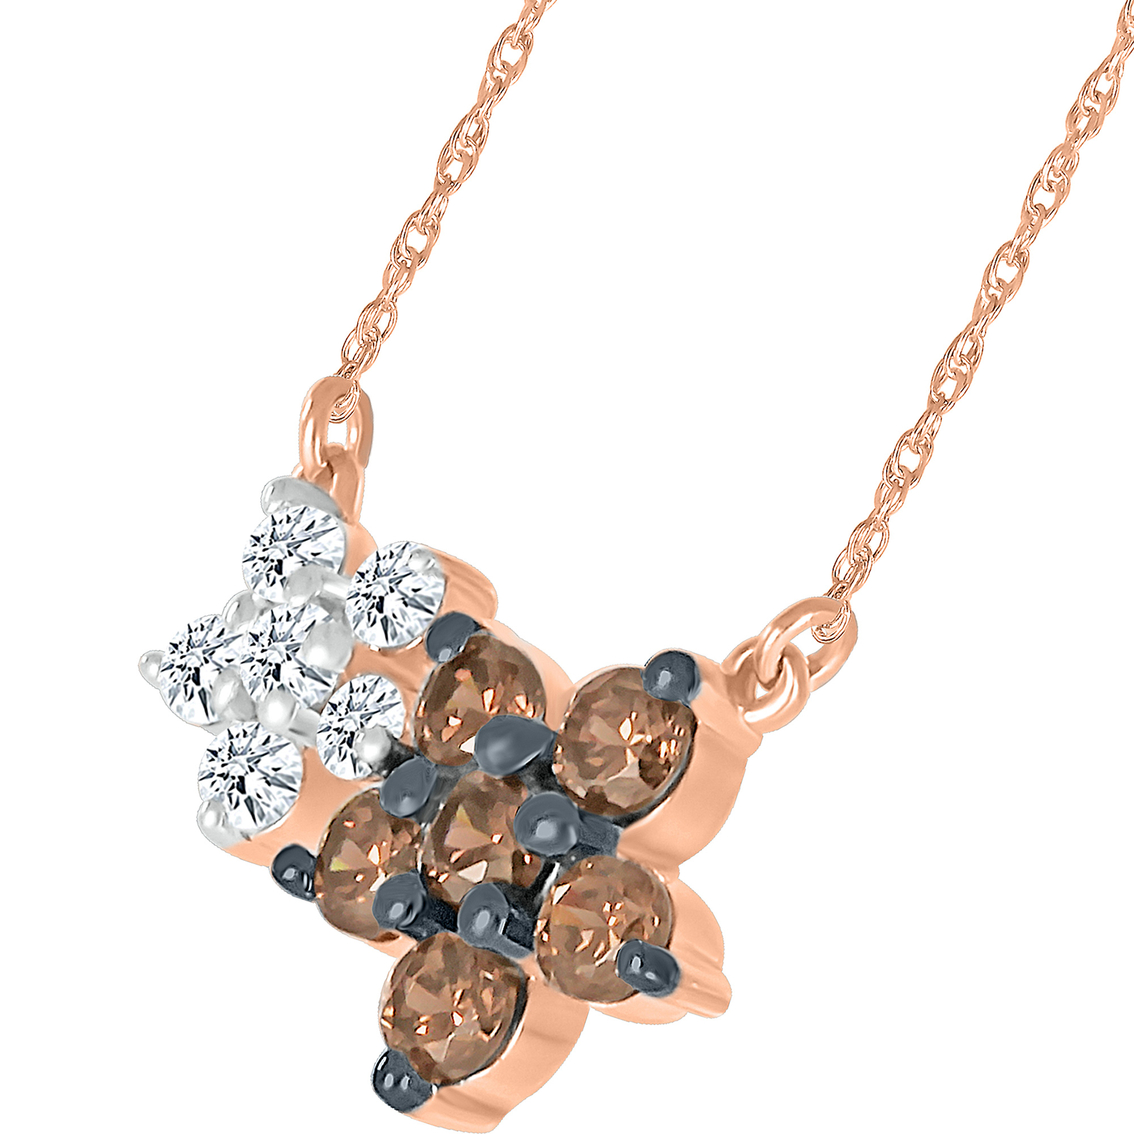 10K Pink Gold 1/3 CTW Brown and White Diamond Fashion Necklace - Image 2 of 2